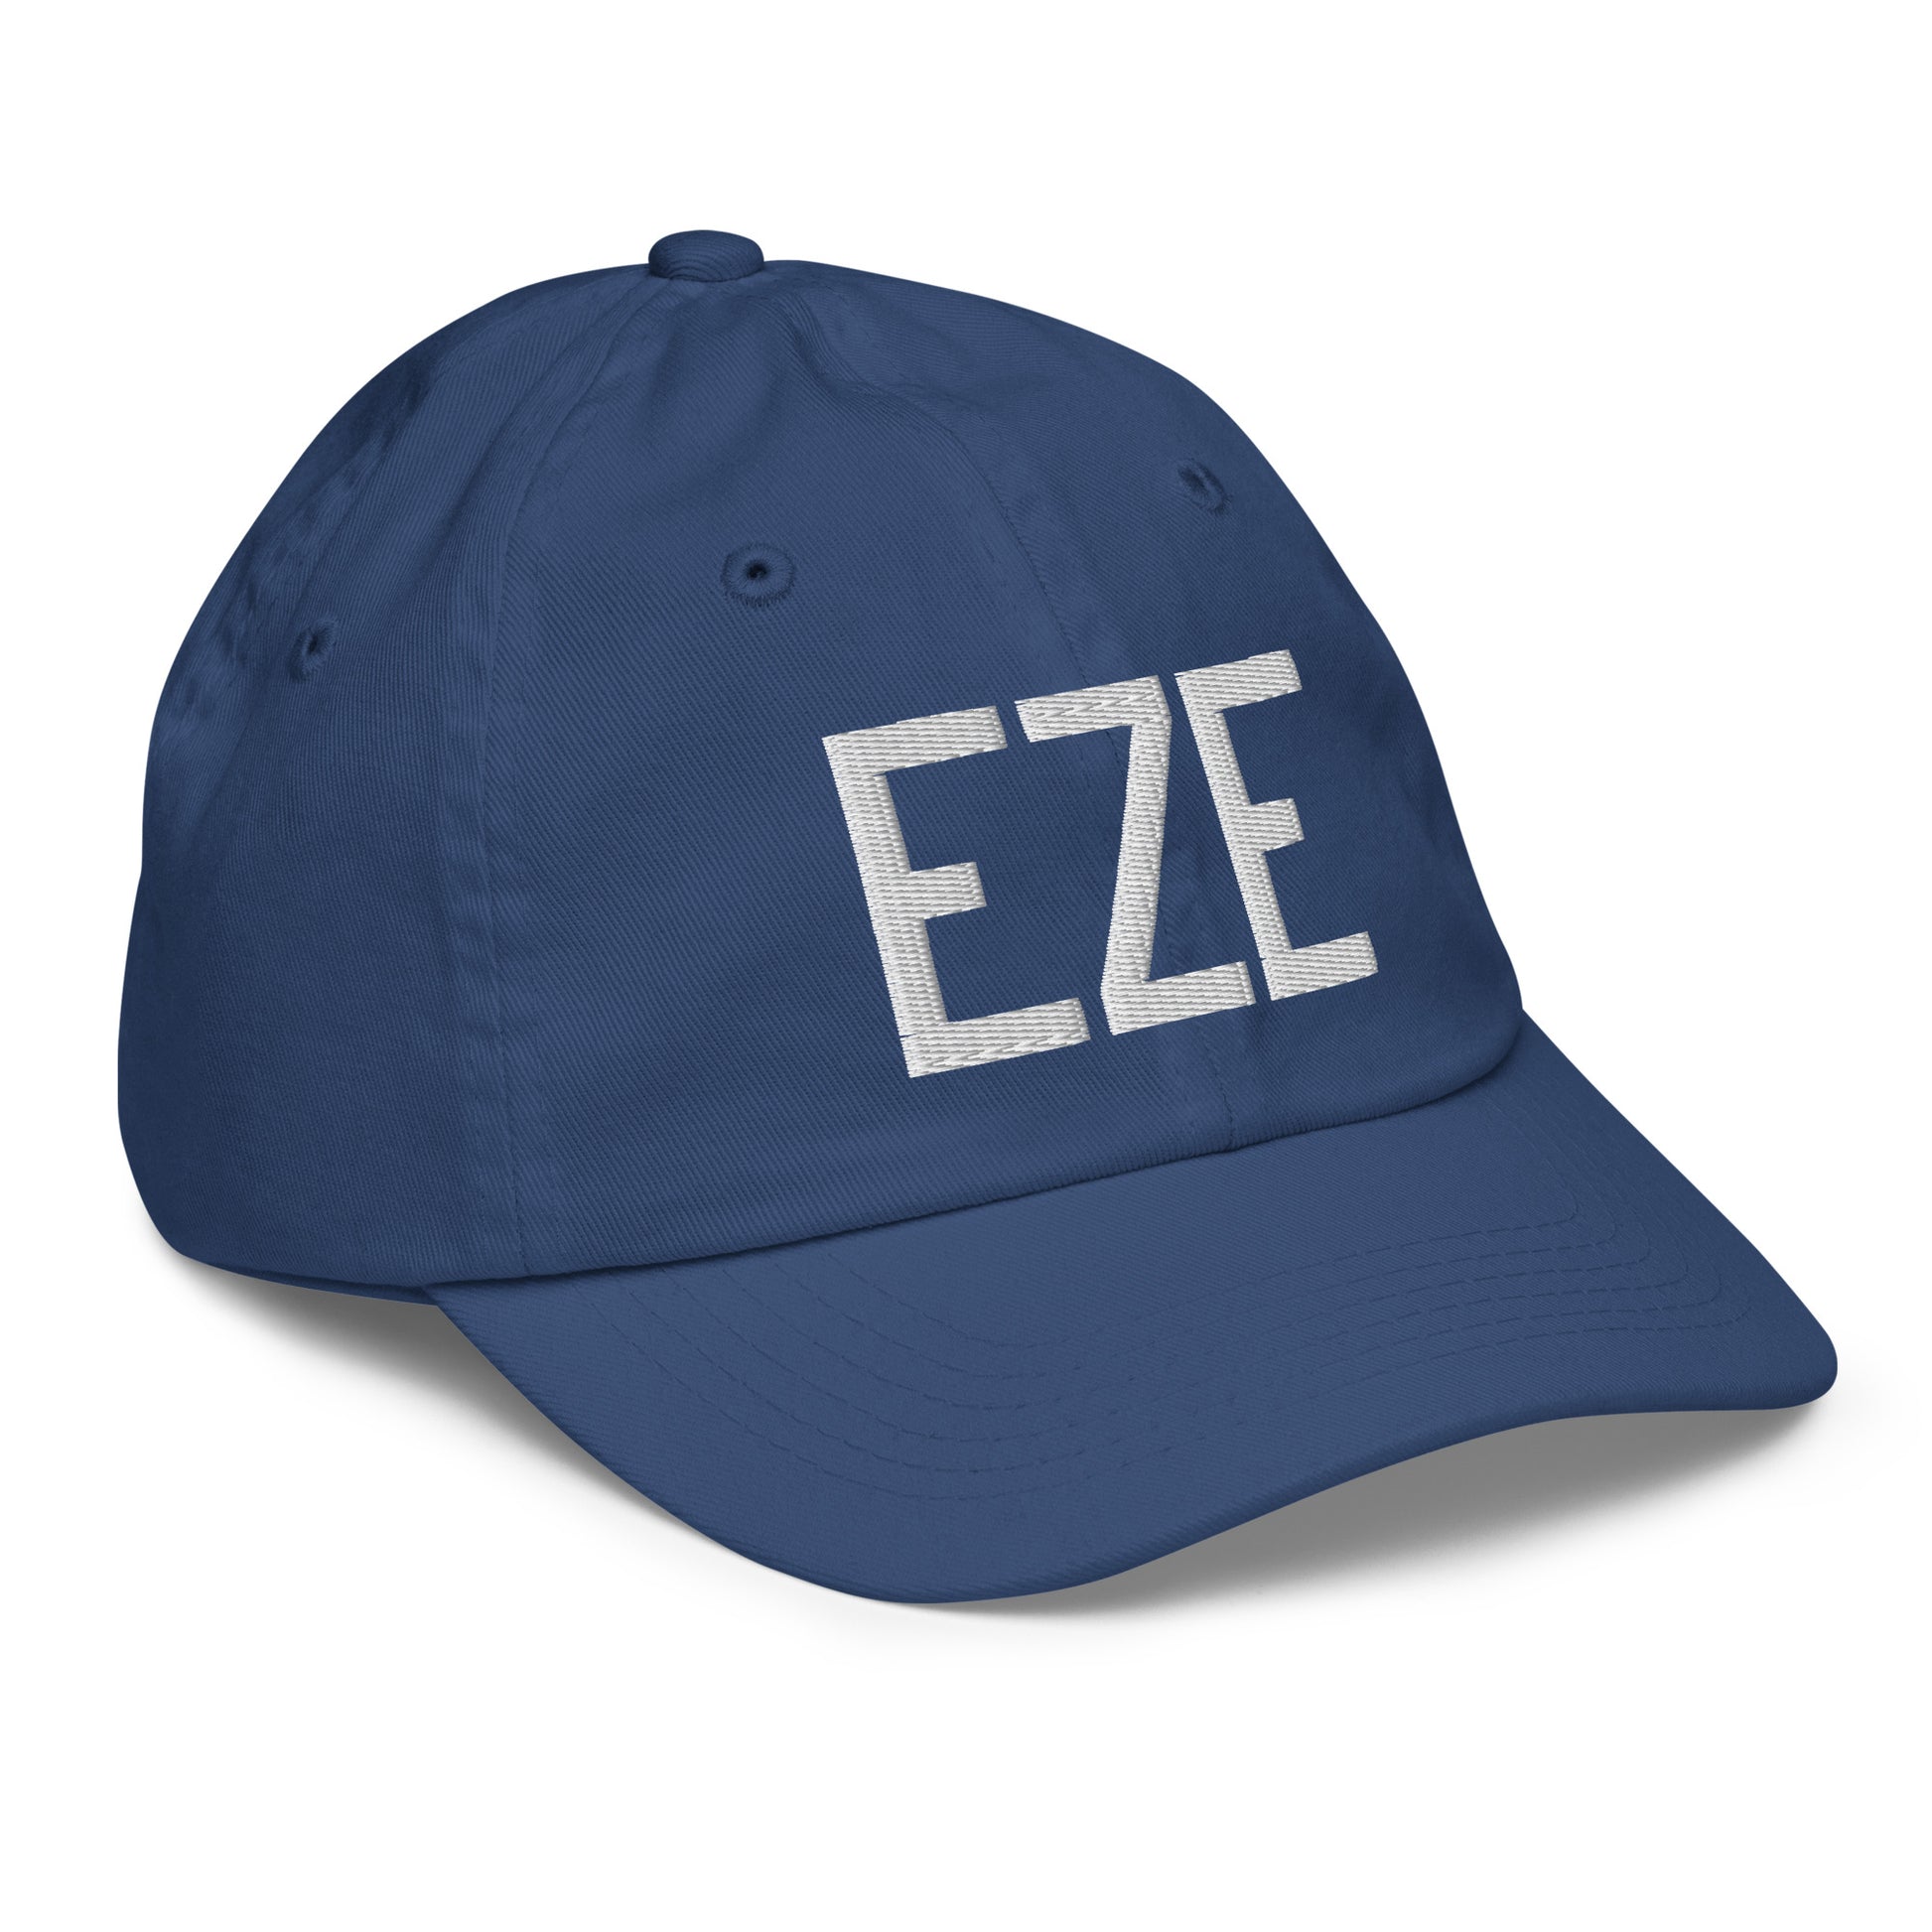 Airport Code Kid's Baseball Cap - White • EZE Buenos Aires • YHM Designs - Image 21